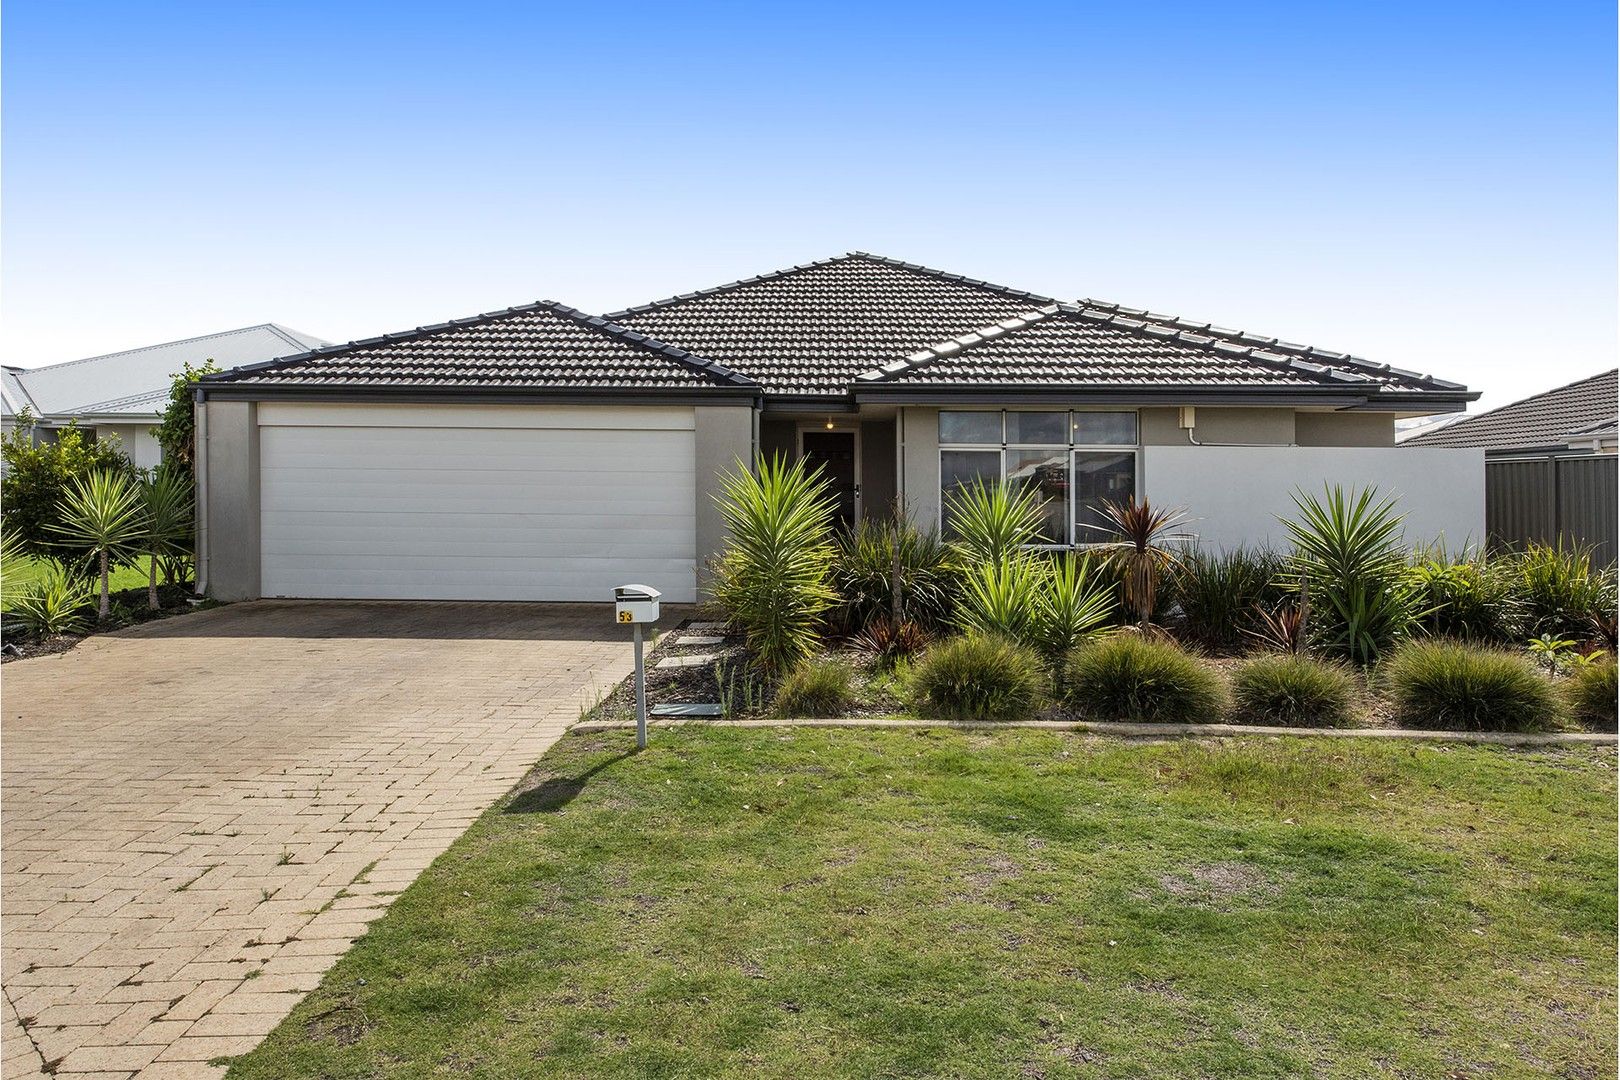 4 bedrooms House in 53 Weewar Circuit SOUTH YUNDERUP WA, 6208